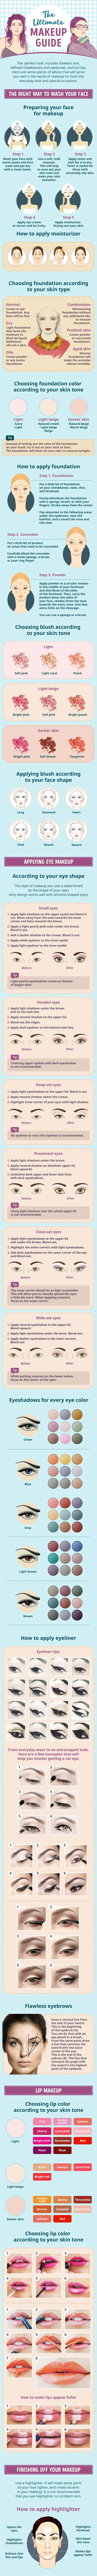 Best Makeup Tutorials for Teens -The Ultimate Makeup Guide You Can’t Live Without - Easy Makeup Ideas for Beginners - Step by Step Tutorials for Foundation, Eye Shadow, Lipstick, Cheeks, Contour, Eyebrows and Eyes - Awesome Makeup Hacks and Tips for Simple DIY Beauty - Day and Evening Looks 